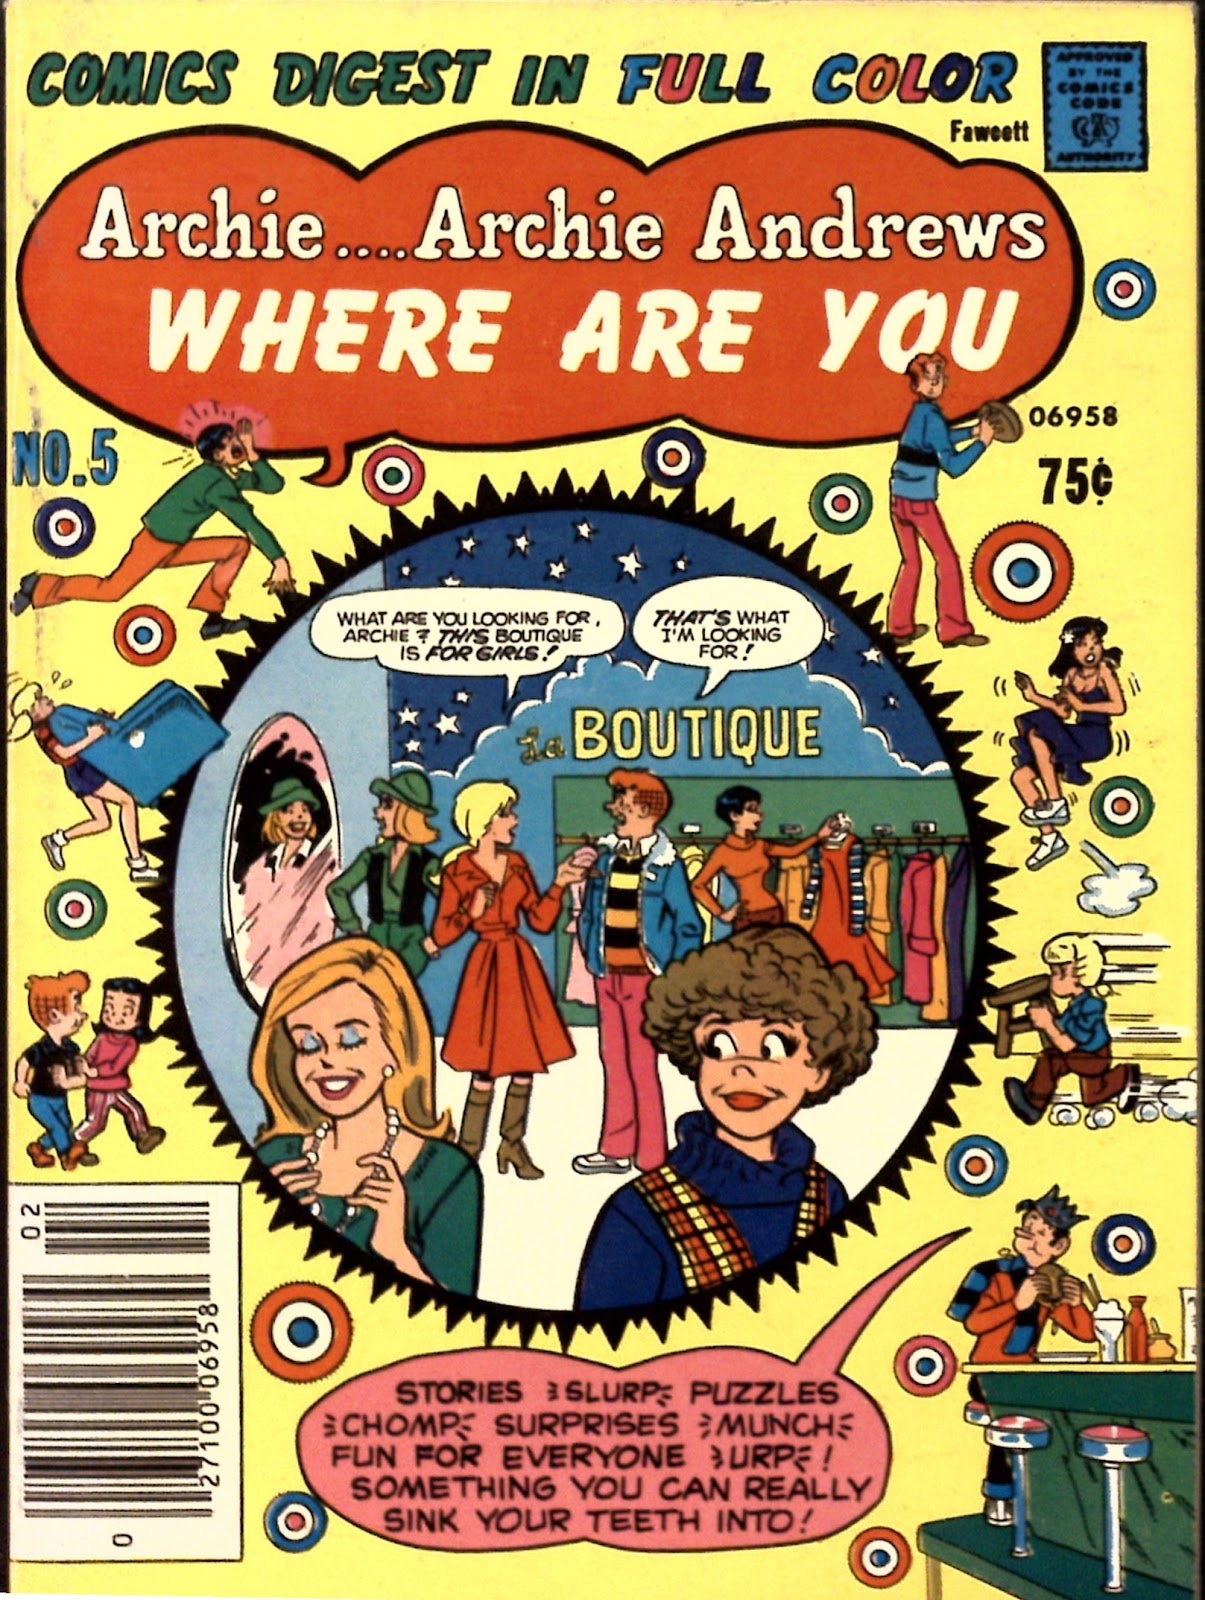 Archie...Archie Andrews, Where Are You? Digest Magazine issue 5 - Page 1